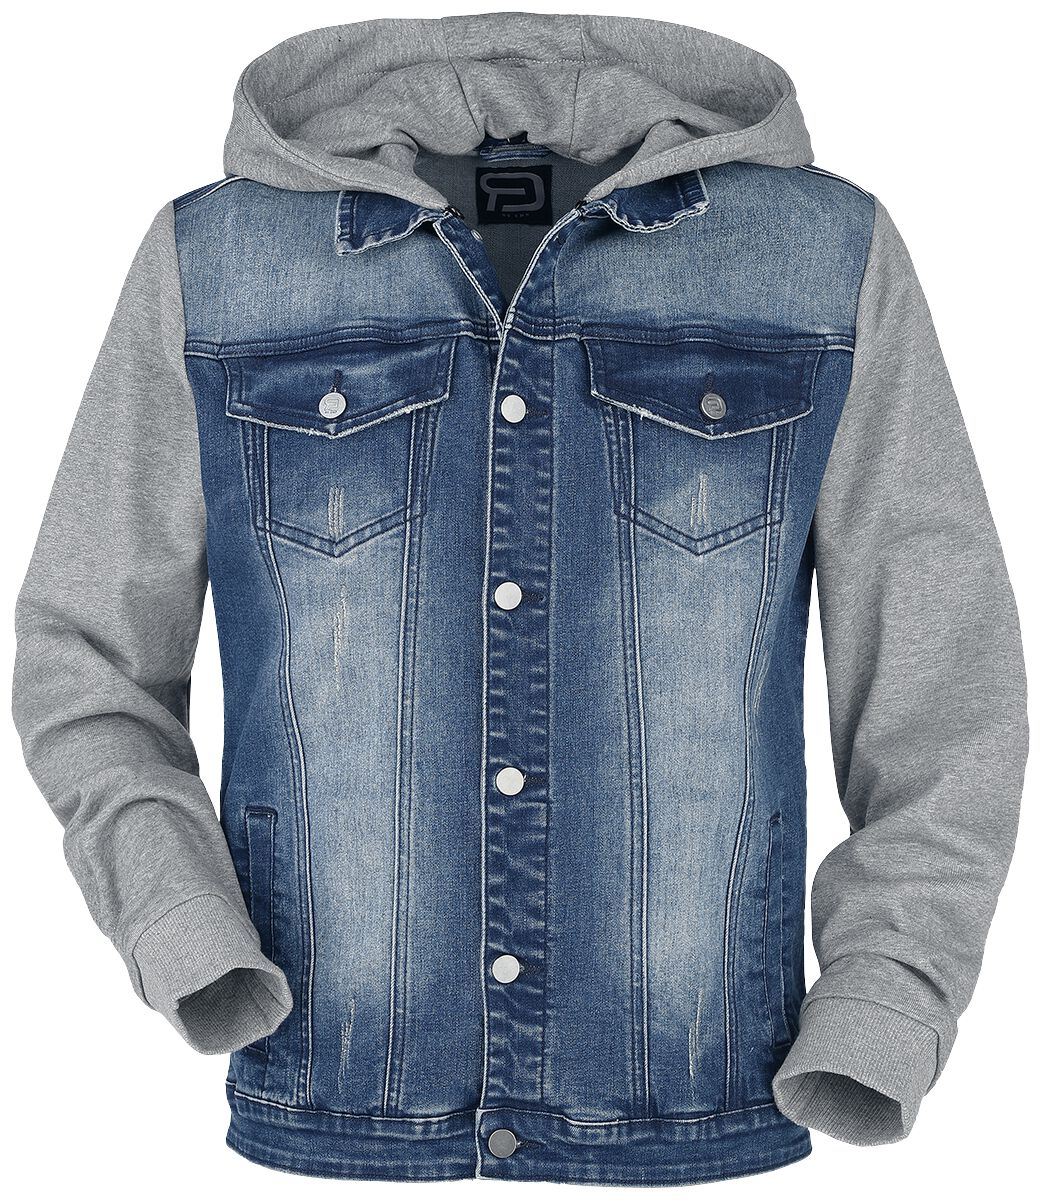 Image of Giubbetto di jeans di RED by EMP - Denim Jacket with Sweat Sleeves and Hood - S a 5XL - Uomo - blu/grigio